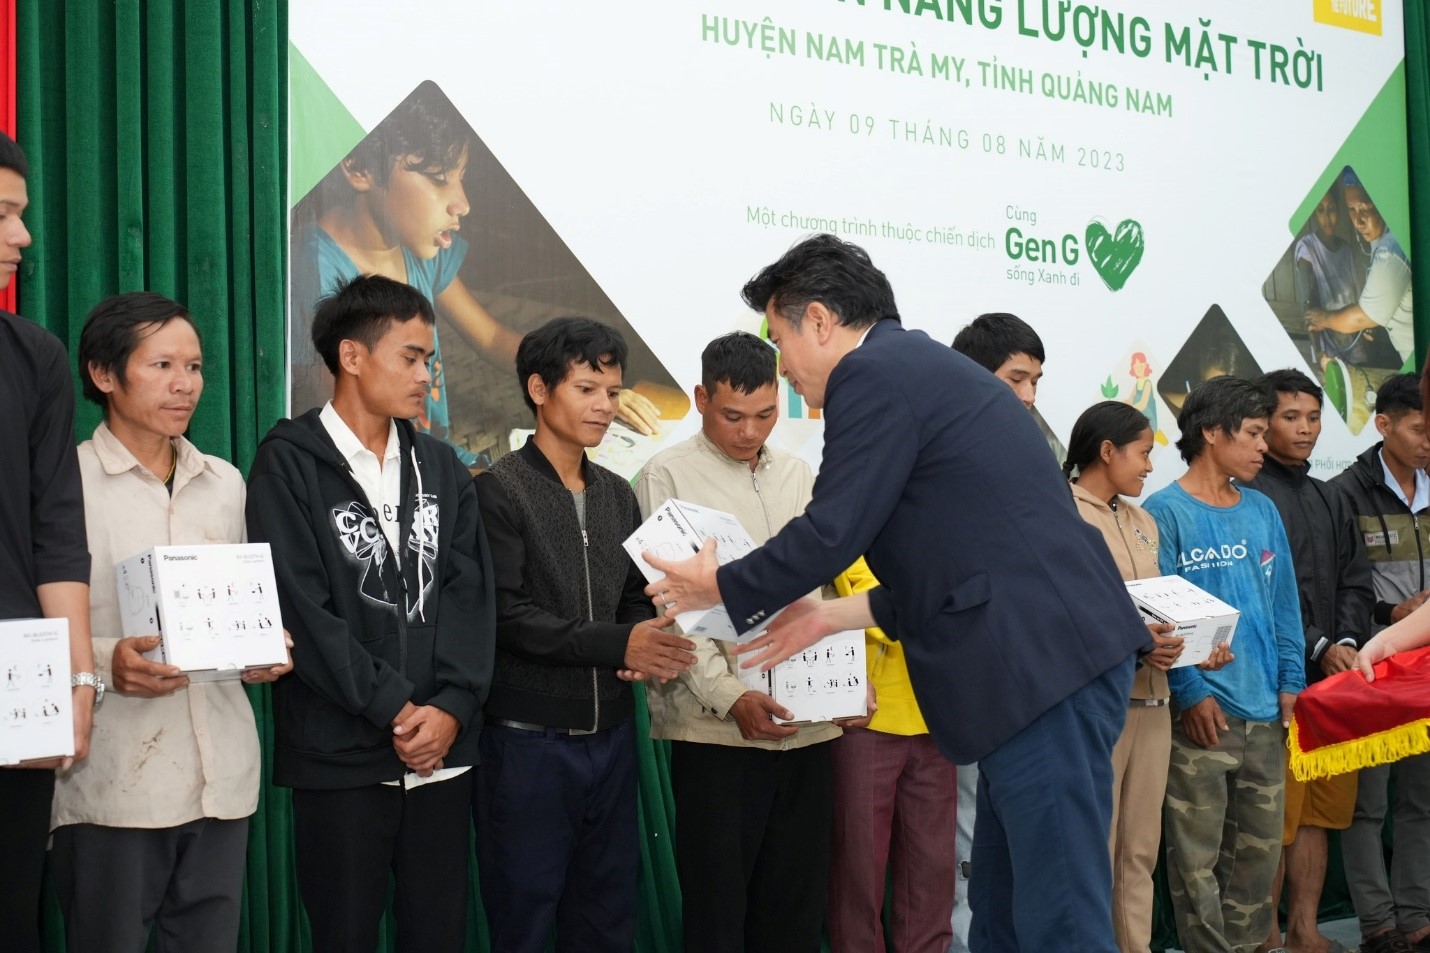 Panasonic, joined by young people, determined in bringing “light” to over 300 disadvantaged households in Nam Tra My district, Quang Nam province 